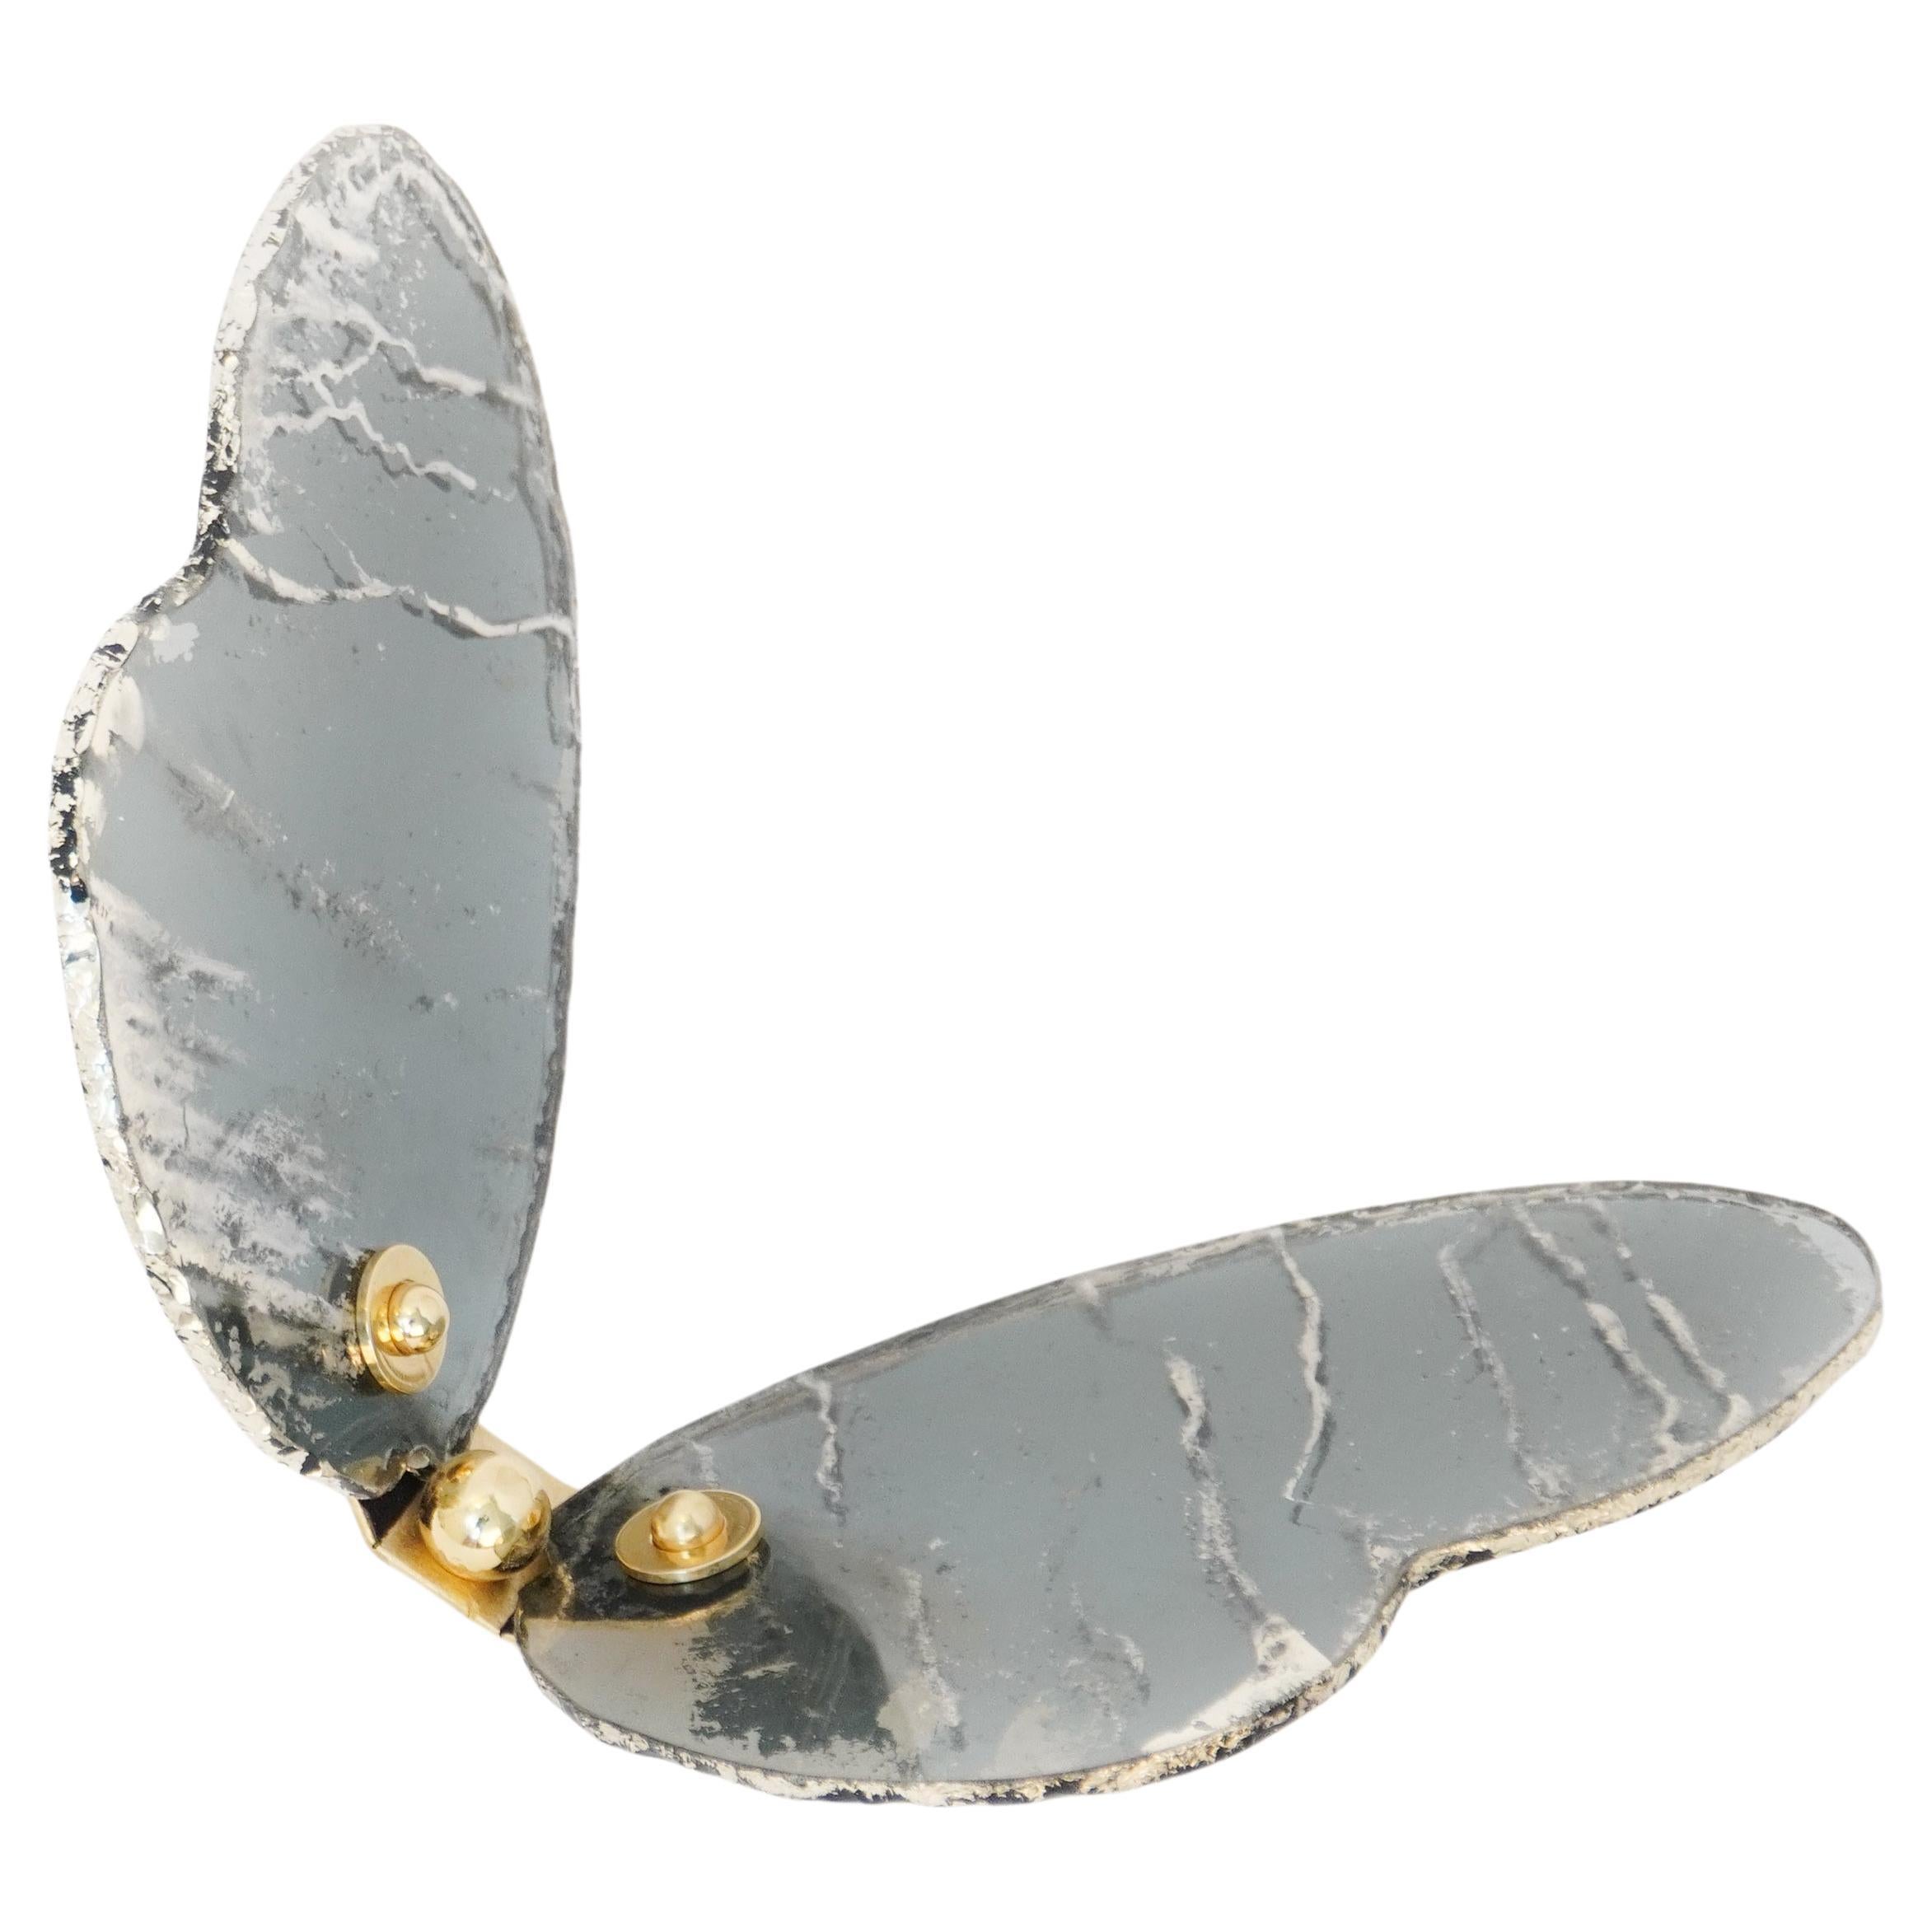  Butterfly Contemporary Wall sculpture , art Silvered Glass Fumè color  